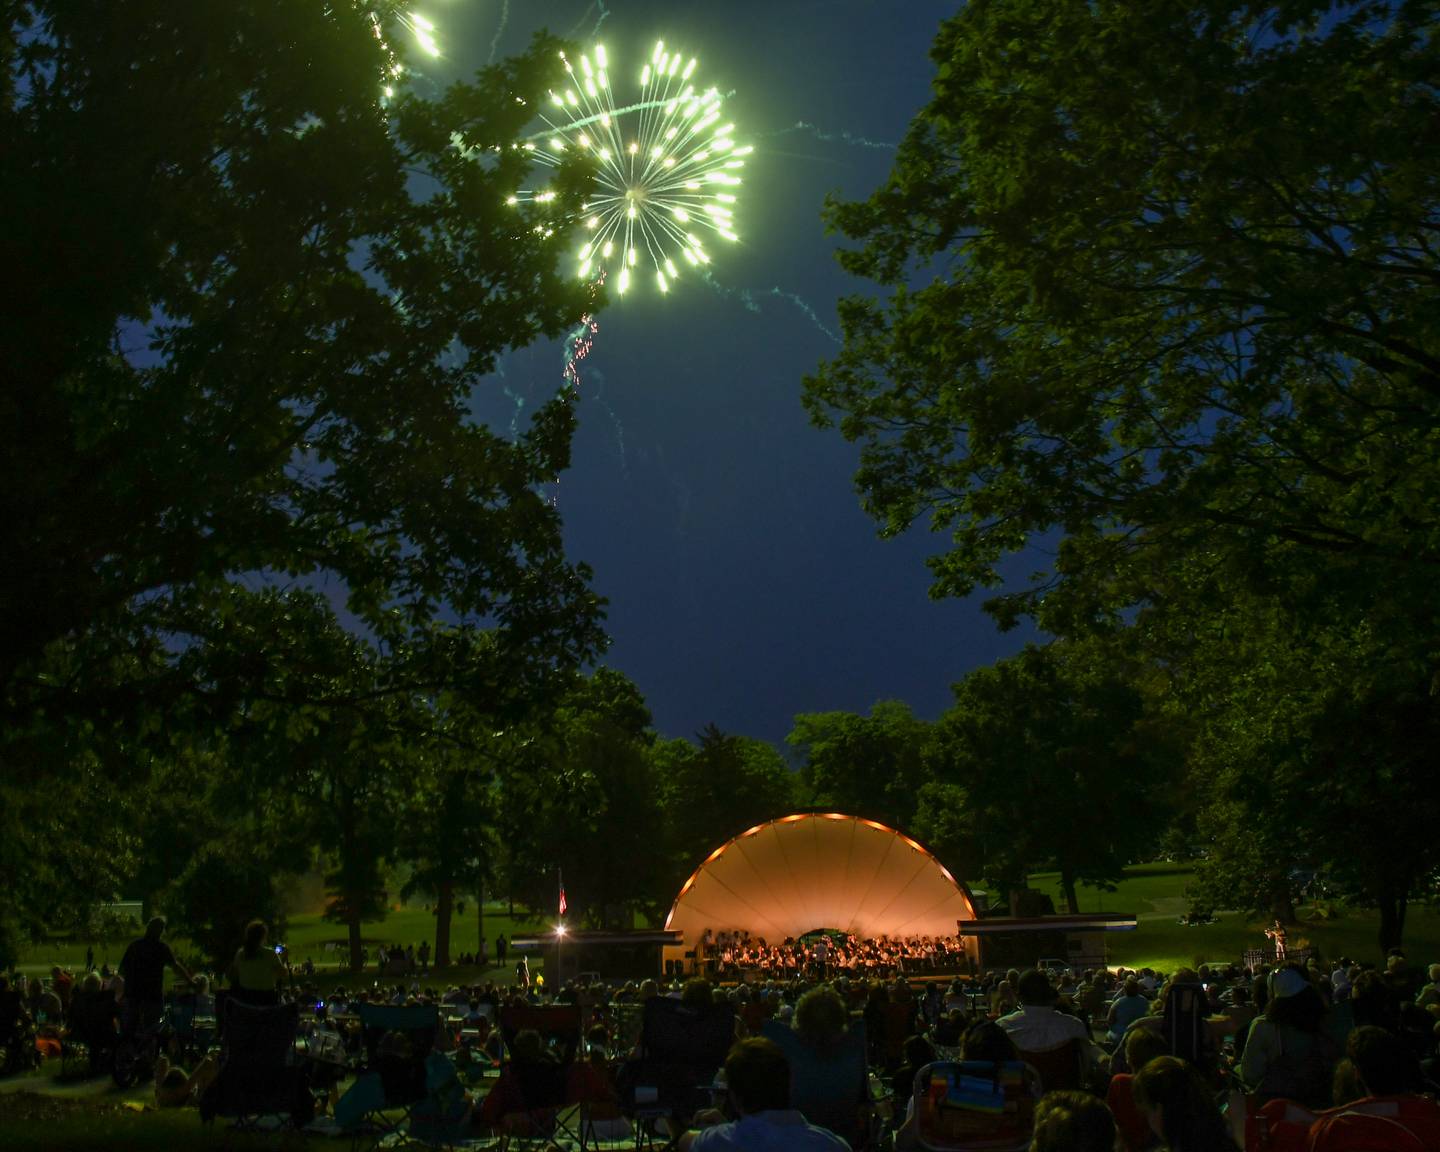 July 4, 2021 file photo - Many came to enjoy the fireworks and music performed by DeKalb’s Municipal Band at the bandshell at Hopkins Park in DeKalb held on July 4.